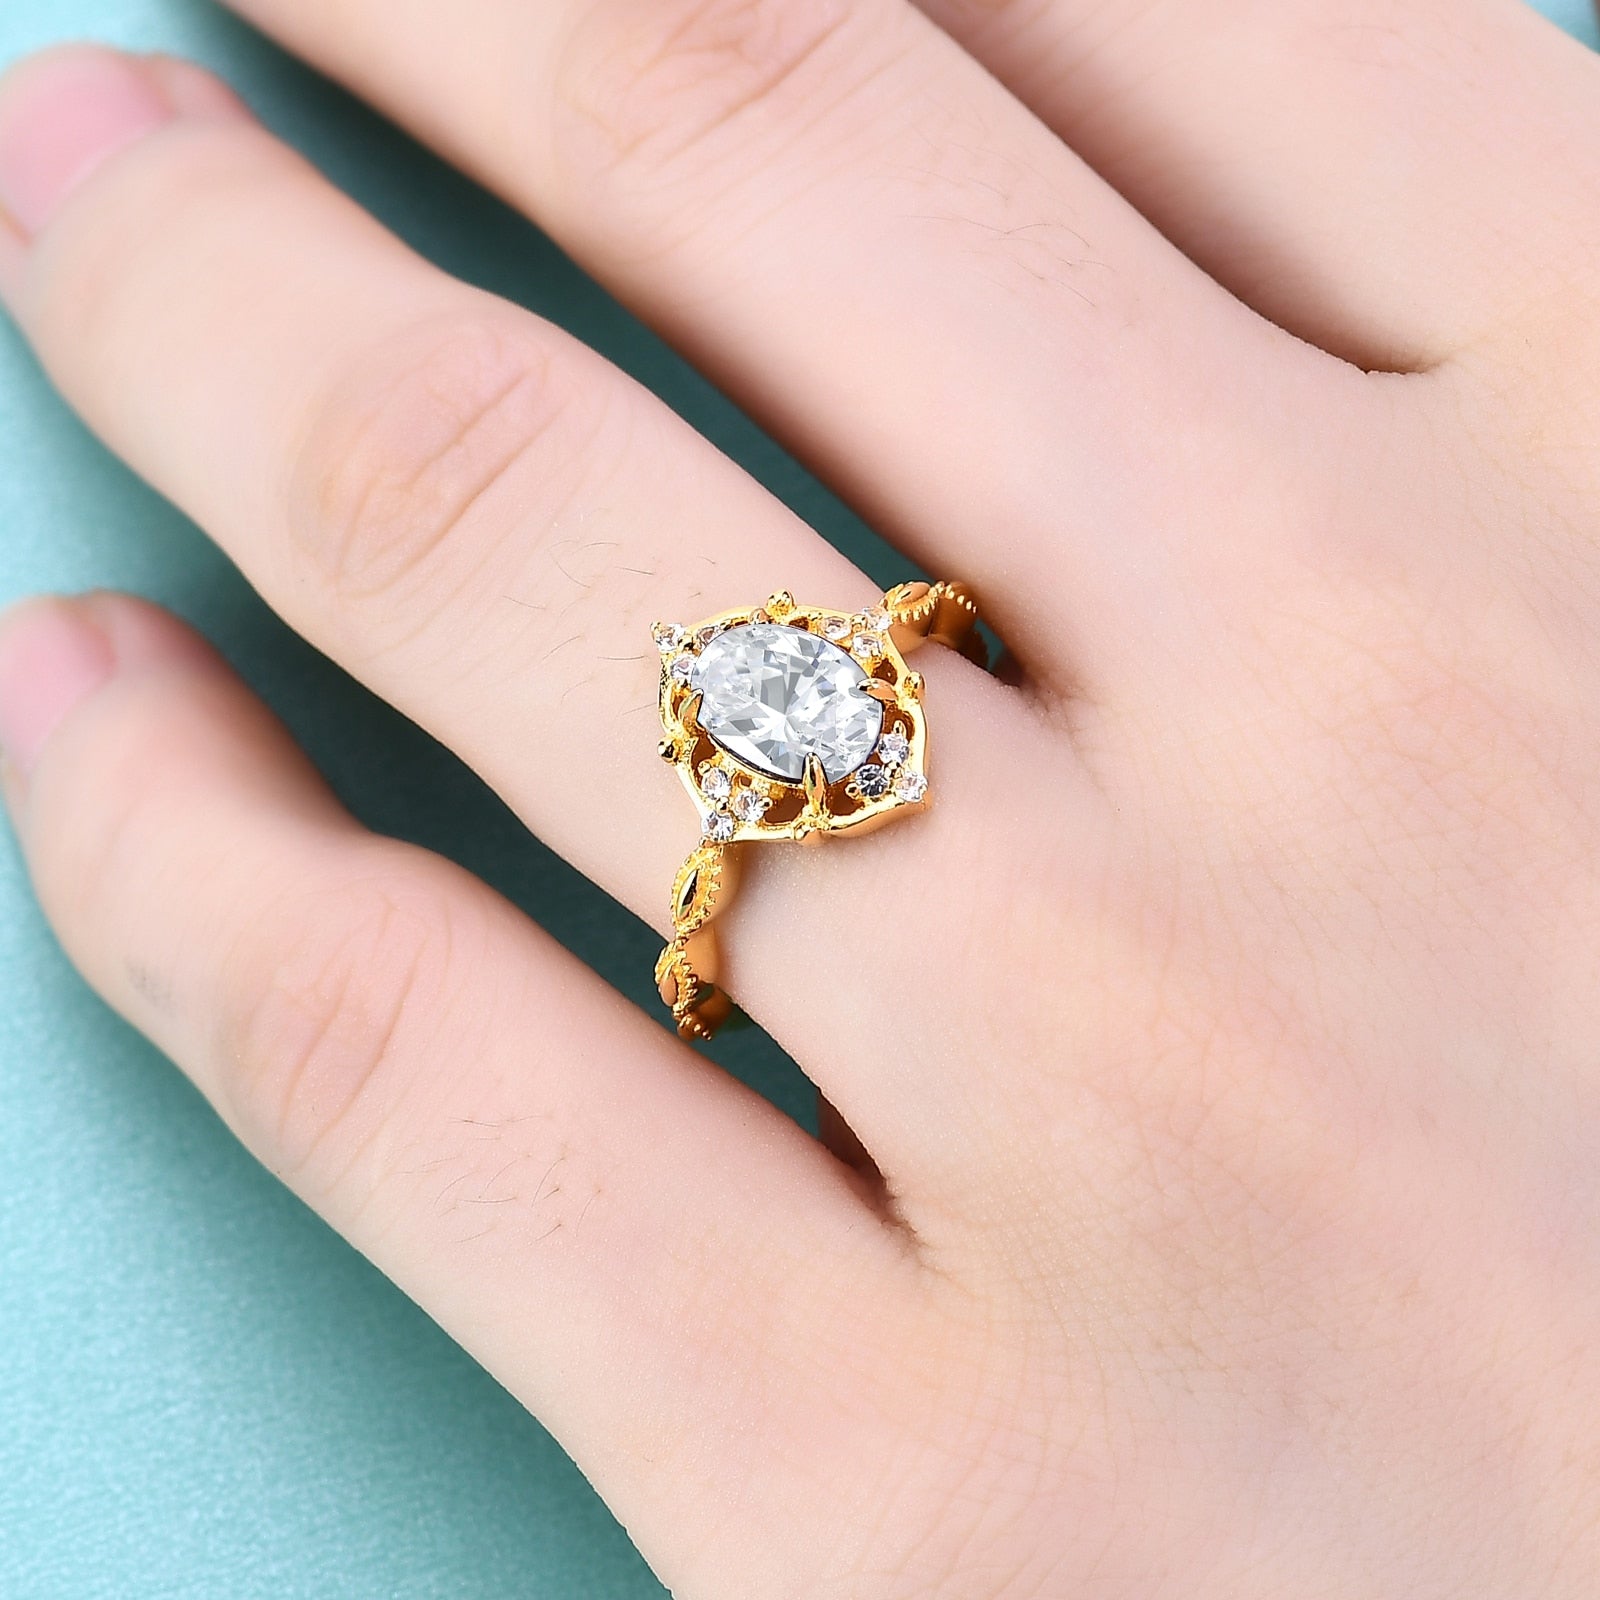 Solid yellow gold vintage style halo engagement ring set with an oval cut moissanite.